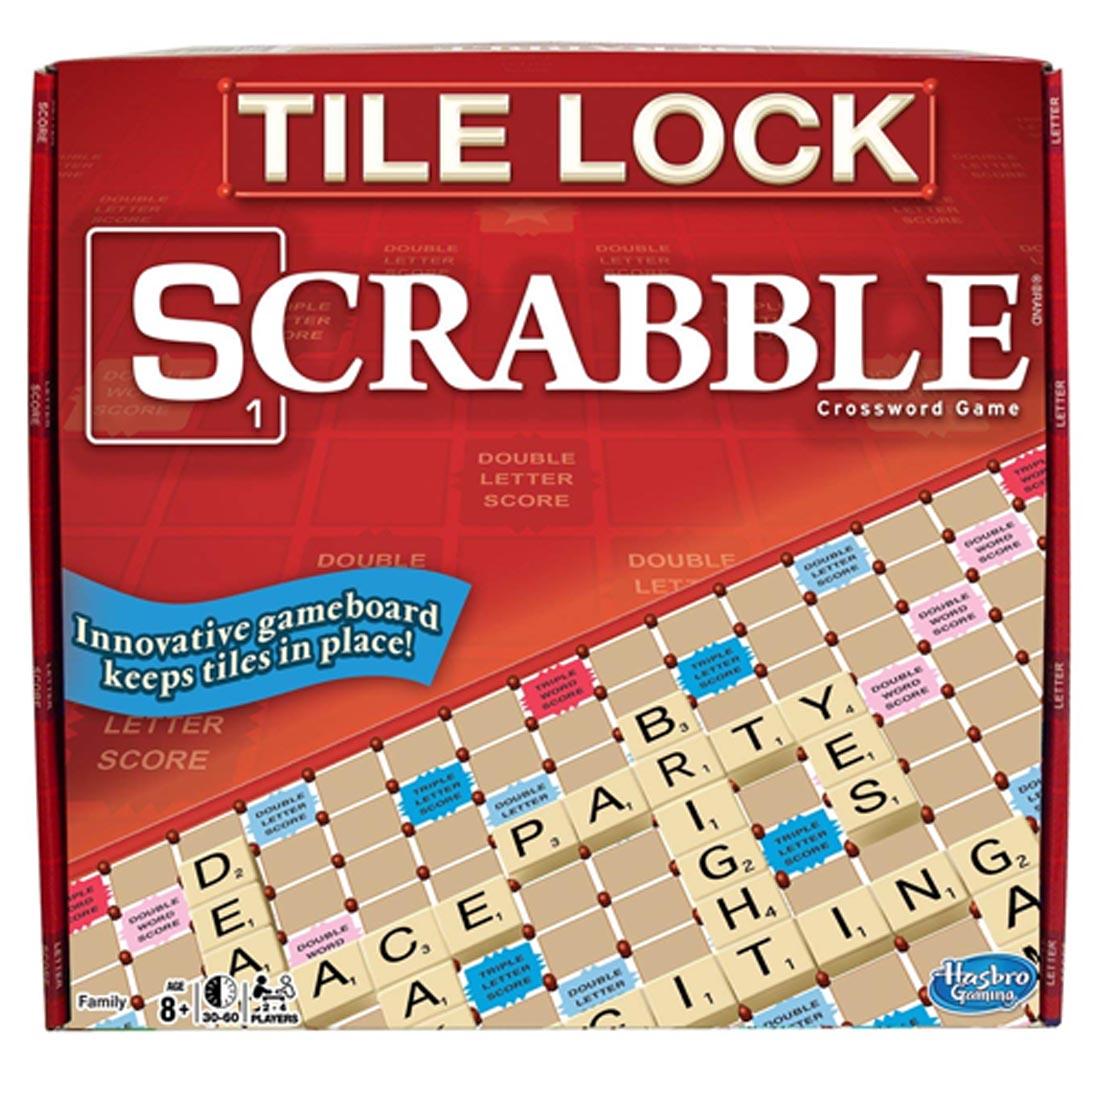 Box cover of Tile Lock Scrabble game